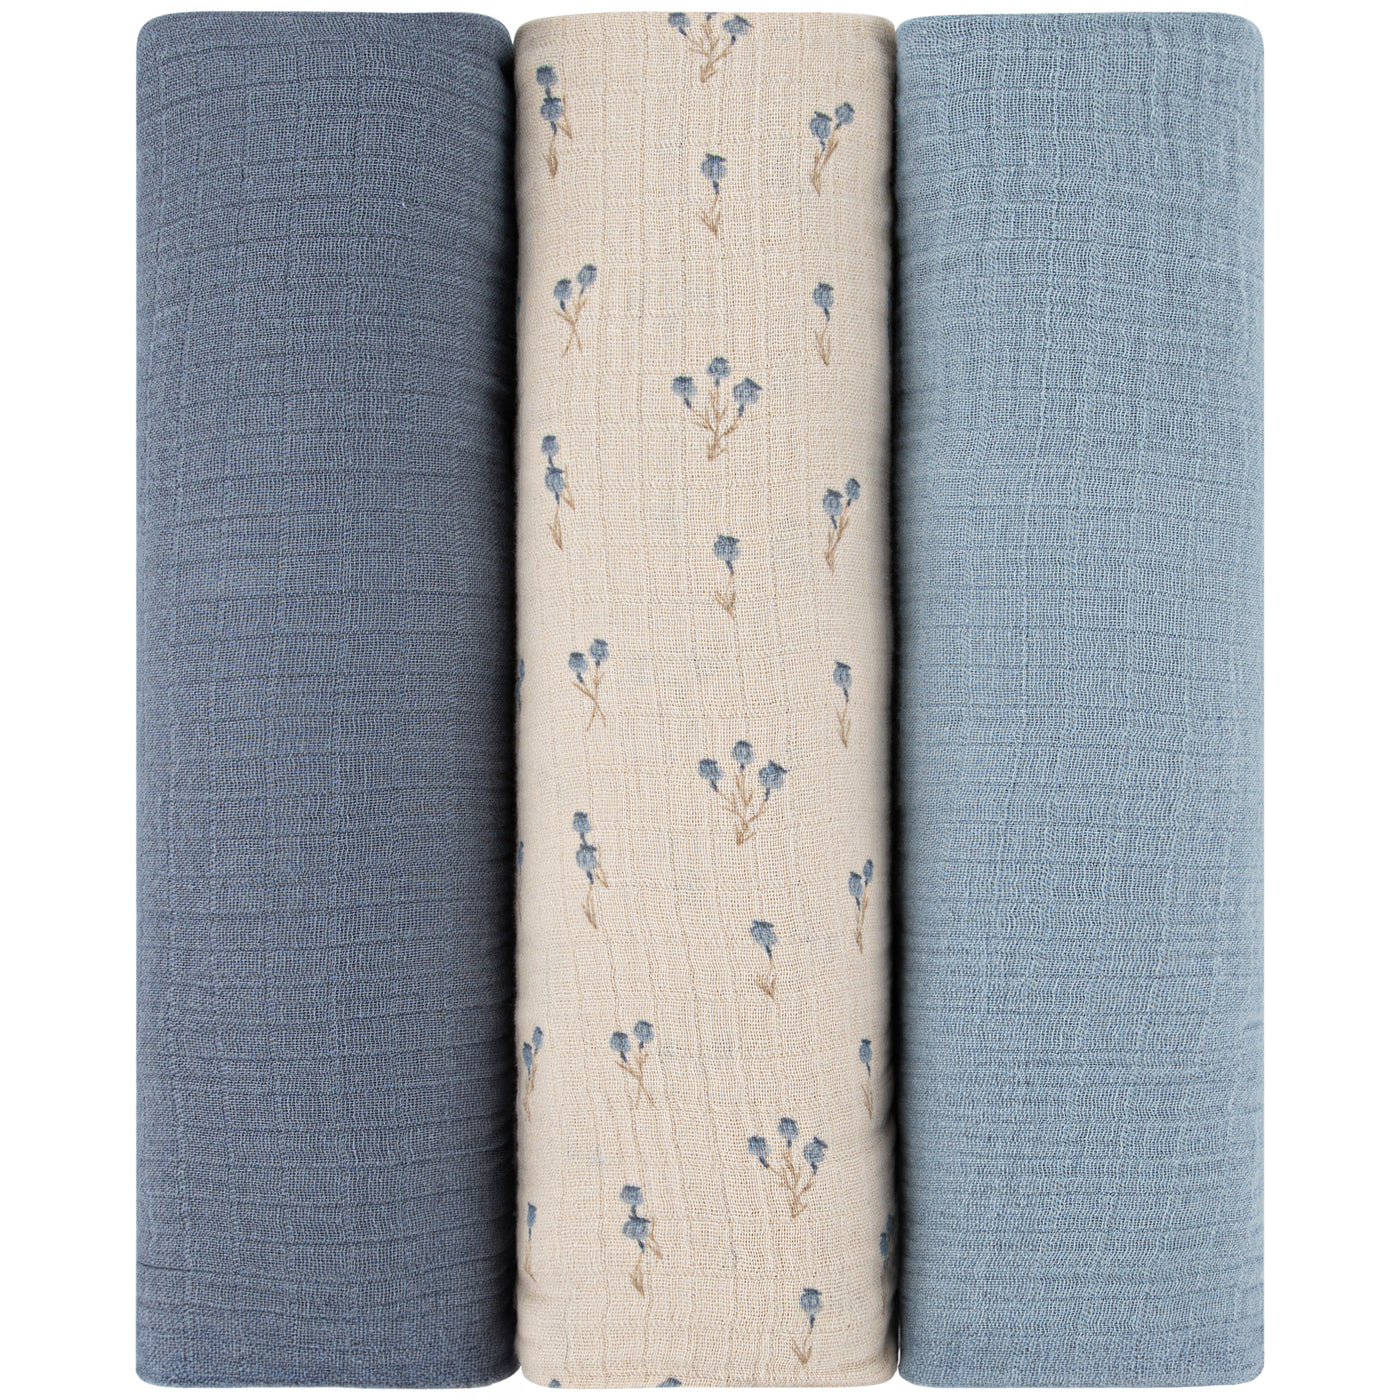 Ely's & Co. Muslin Swaddle Three Pack - Blue Bluebell Collection